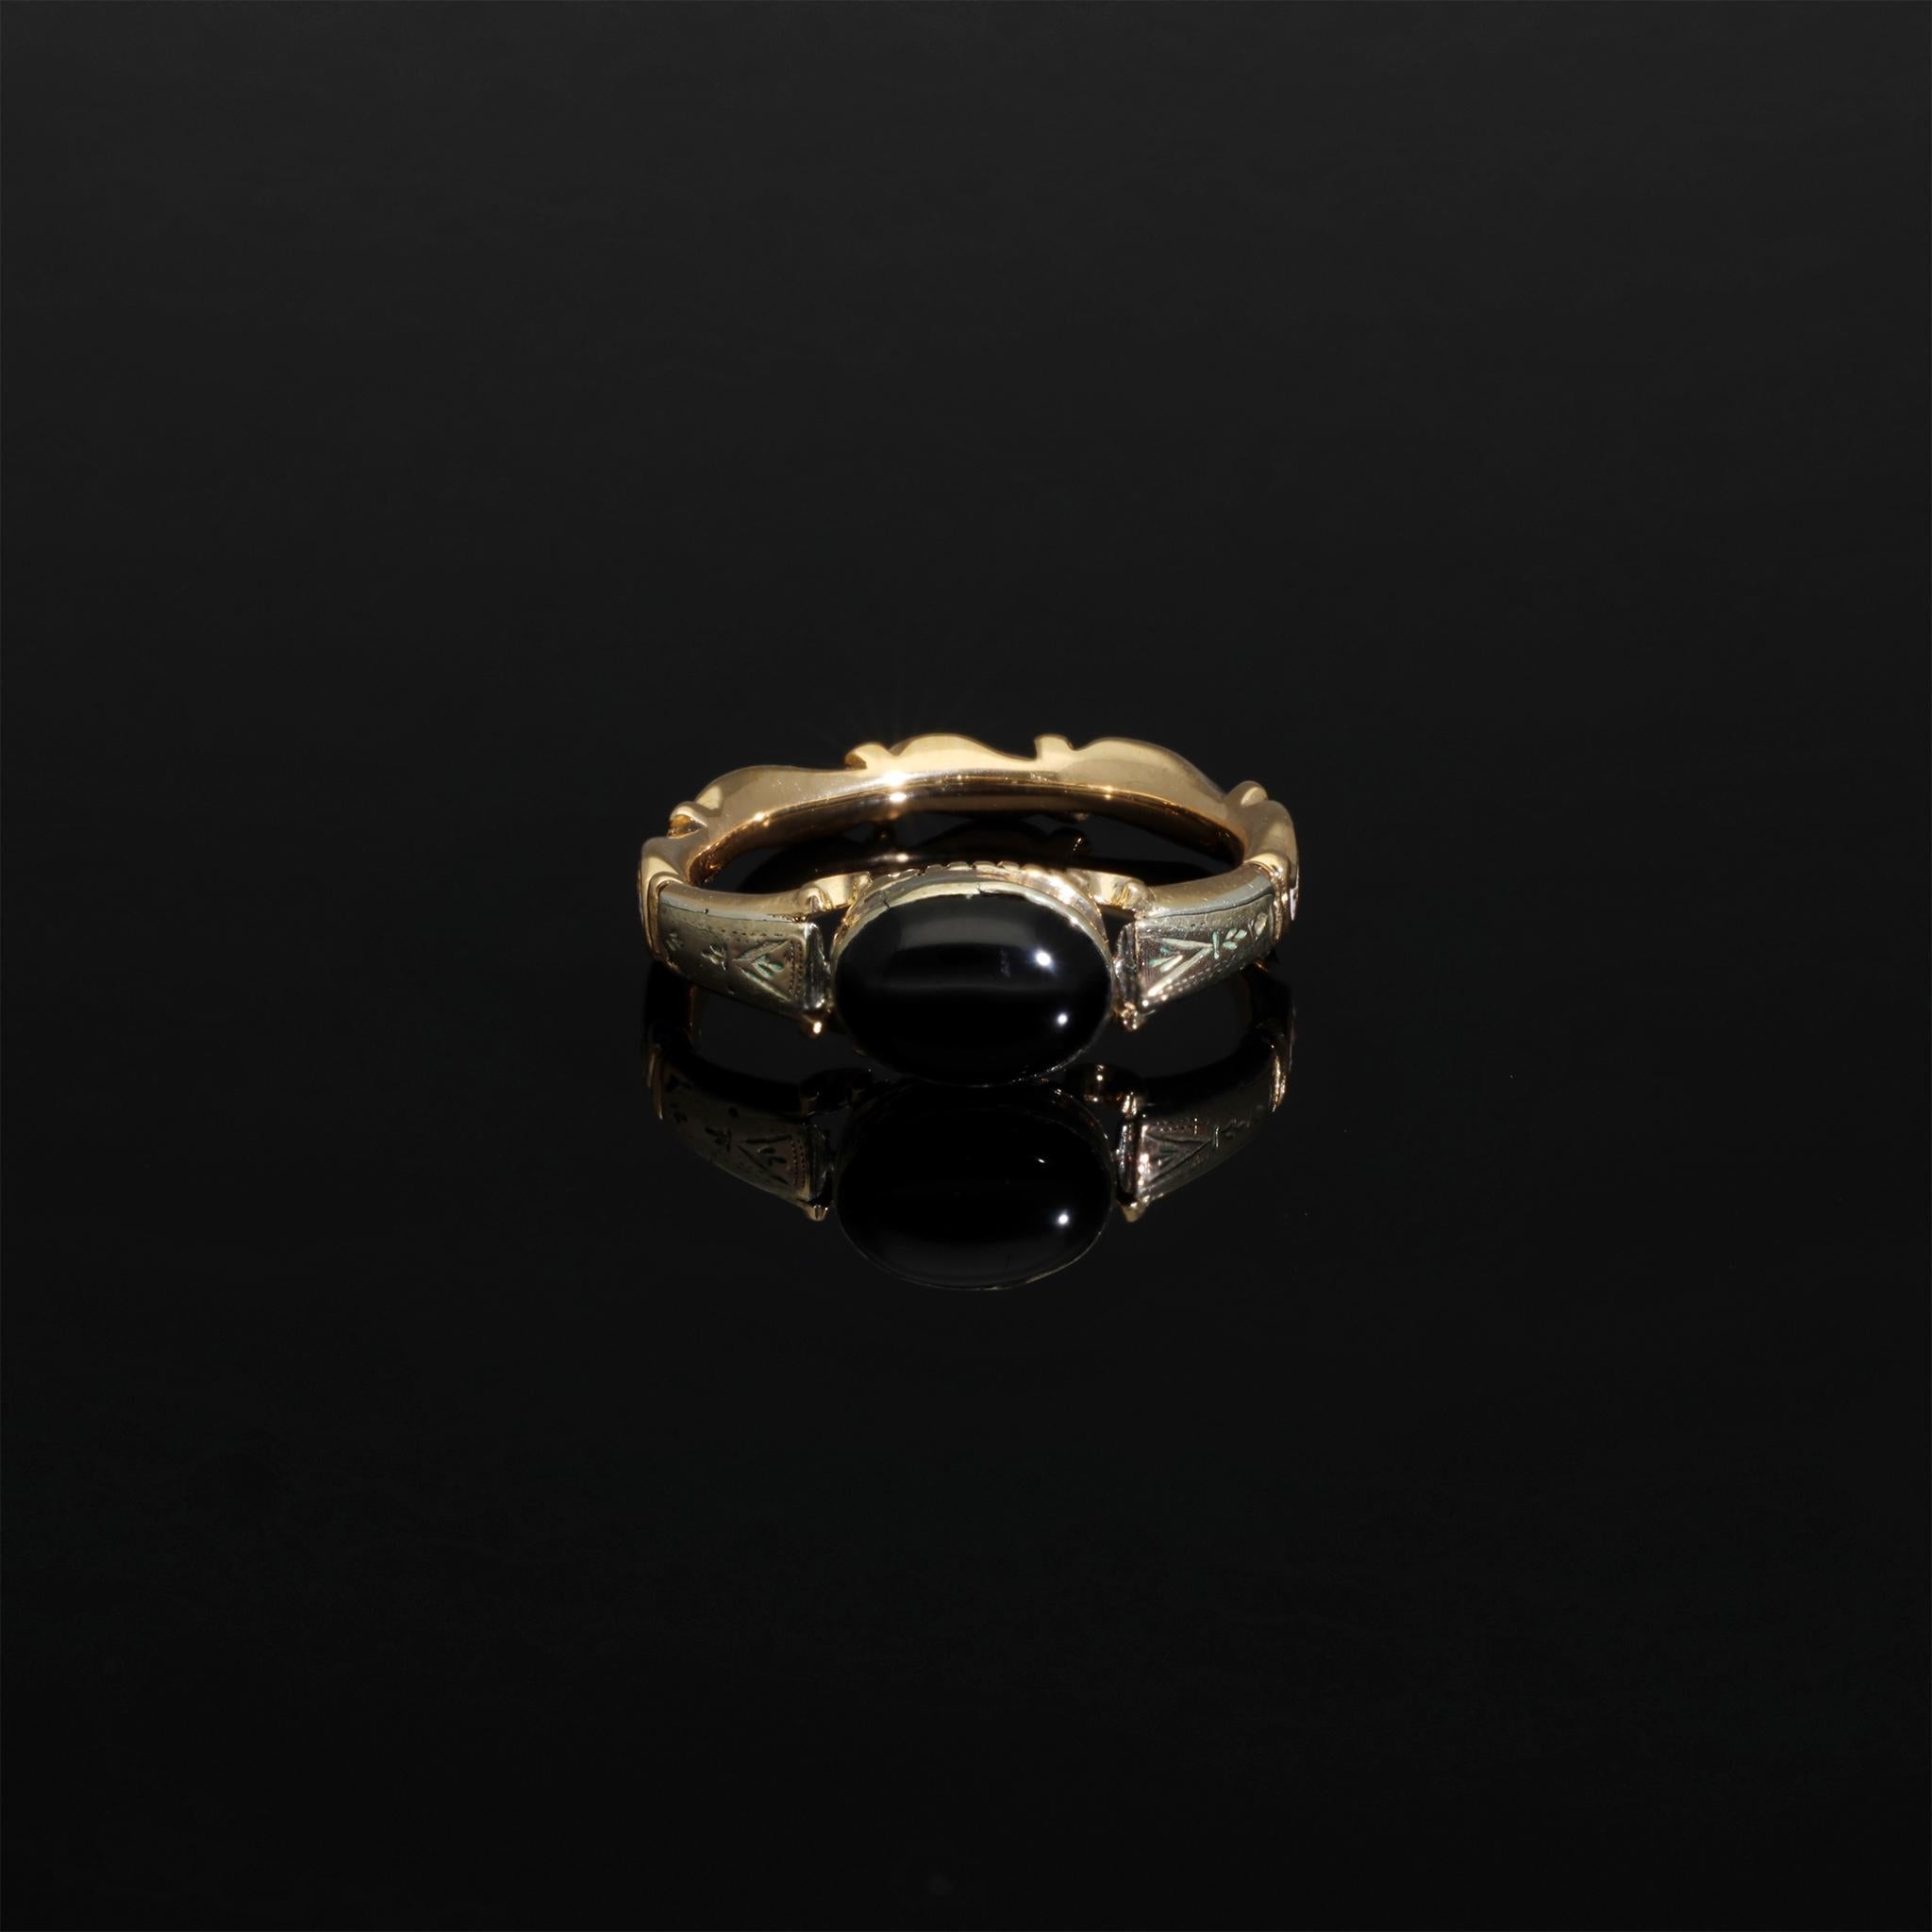 A museum-worthy 255 year old antique mounring ring! Coming from Sweden, this solid 18k gold ring was made to commemorate Will who passed at the age of 40! This antique Georgian era high carat gold ring is set with a black onyx cabochon and adorned